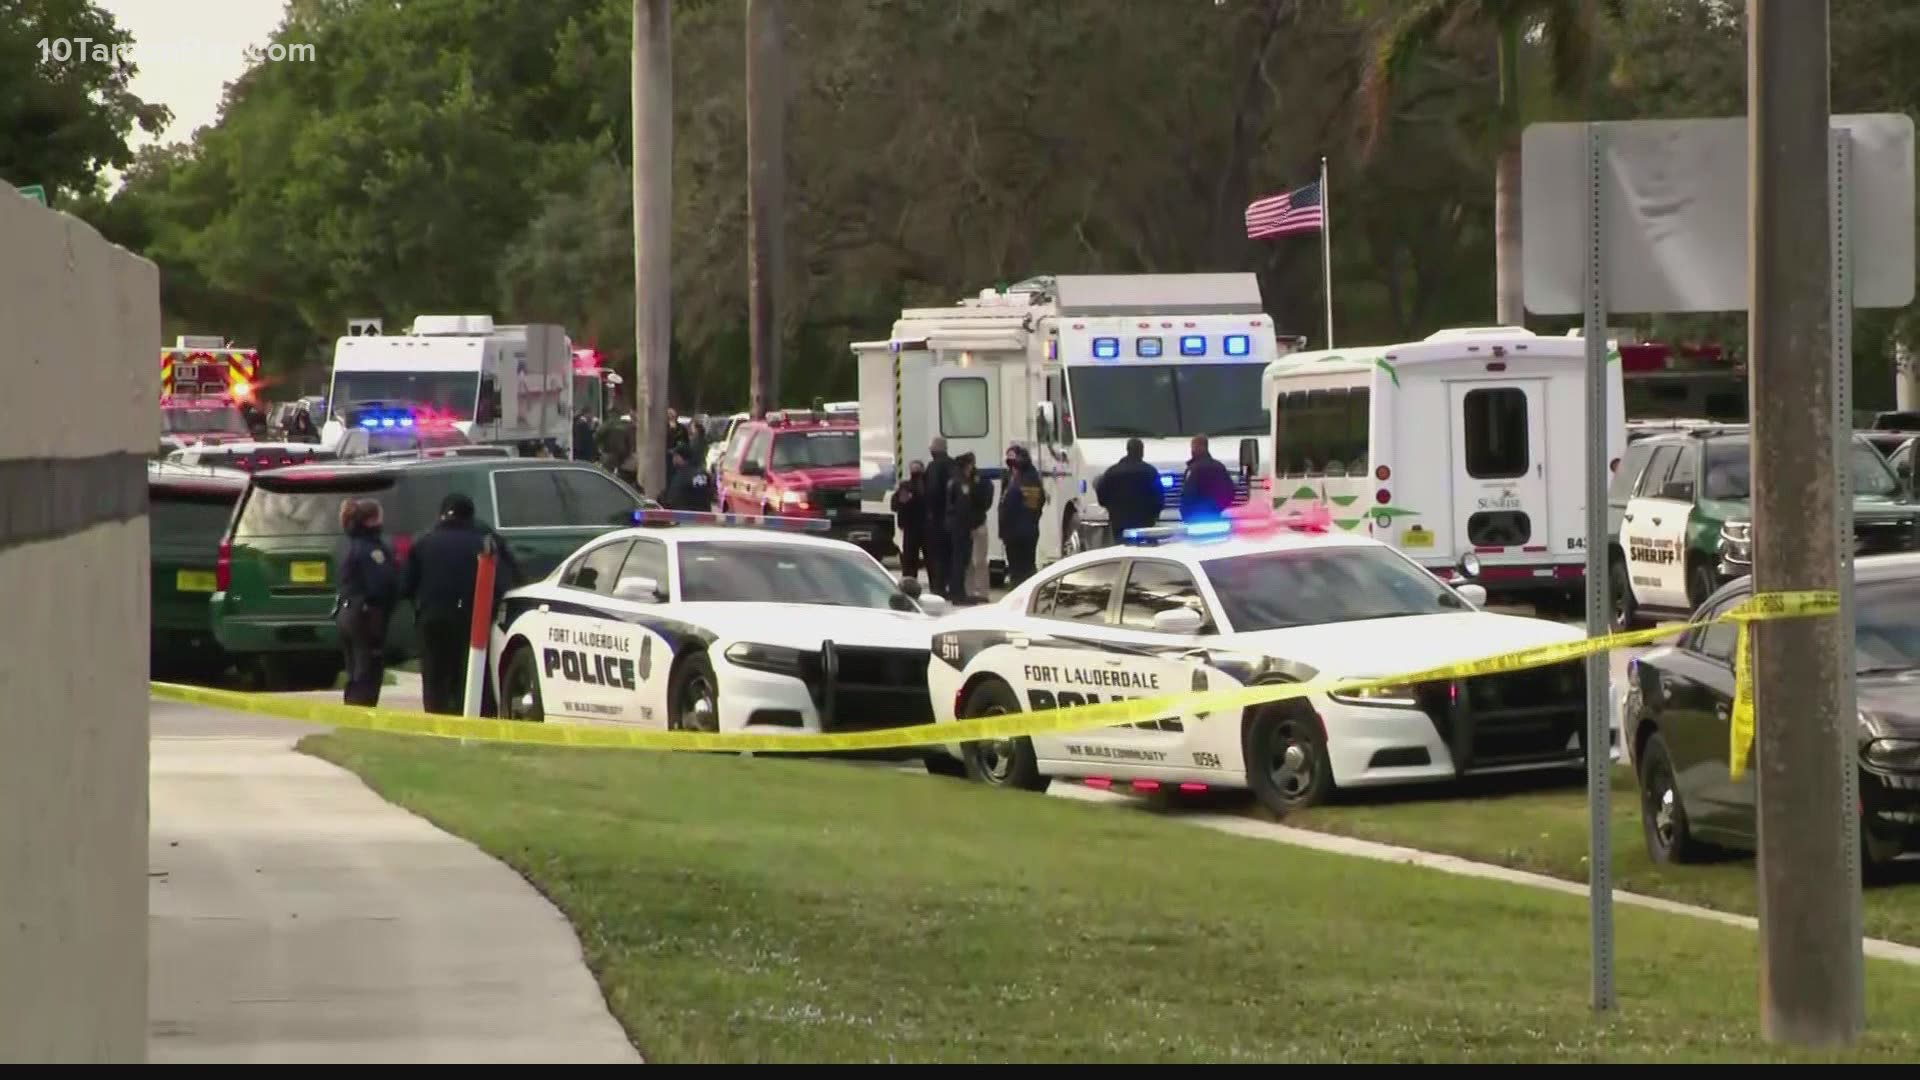 The deadly shooting happened early Tuesday morning in a neighborhood in Sunrise, Fla.